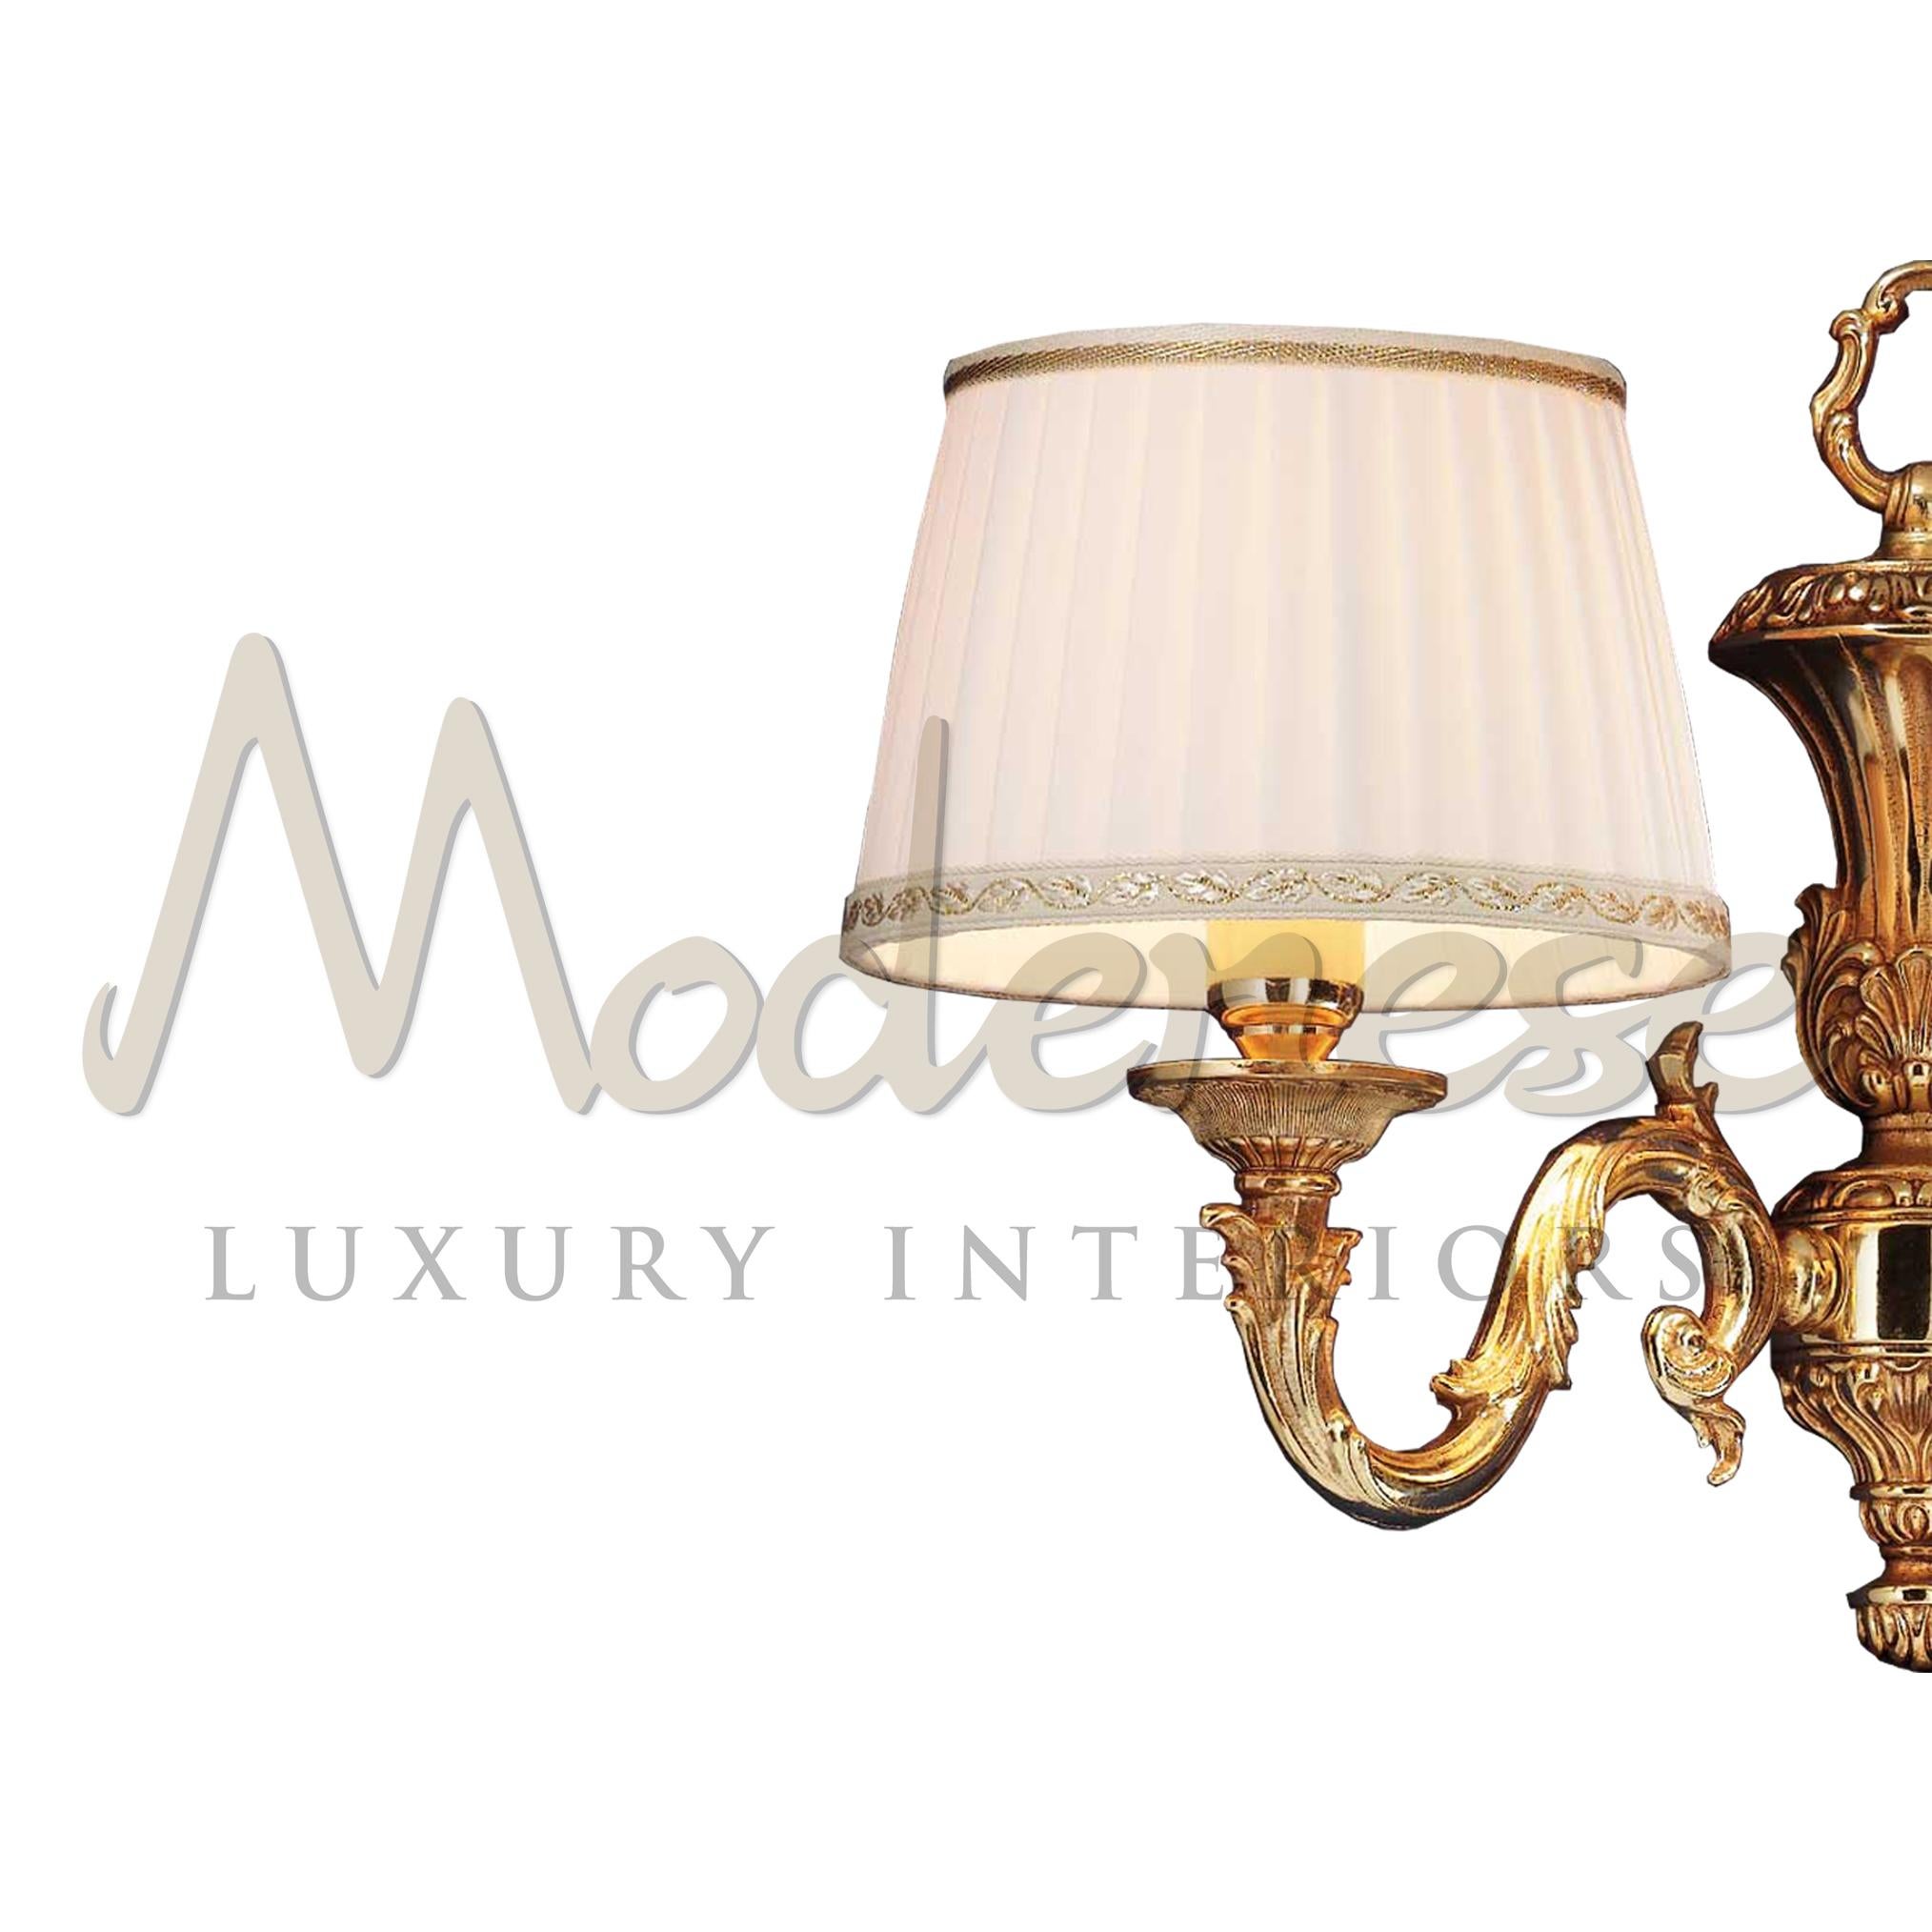 Complete a lavish social room with a baroque touch by adding this Modenese Interiors wall lamp. The iteam features two carved arms and their related ivory lampshades, plus a french gold finishing. The two lampbulbs must be E14 and maximum 40Watt.